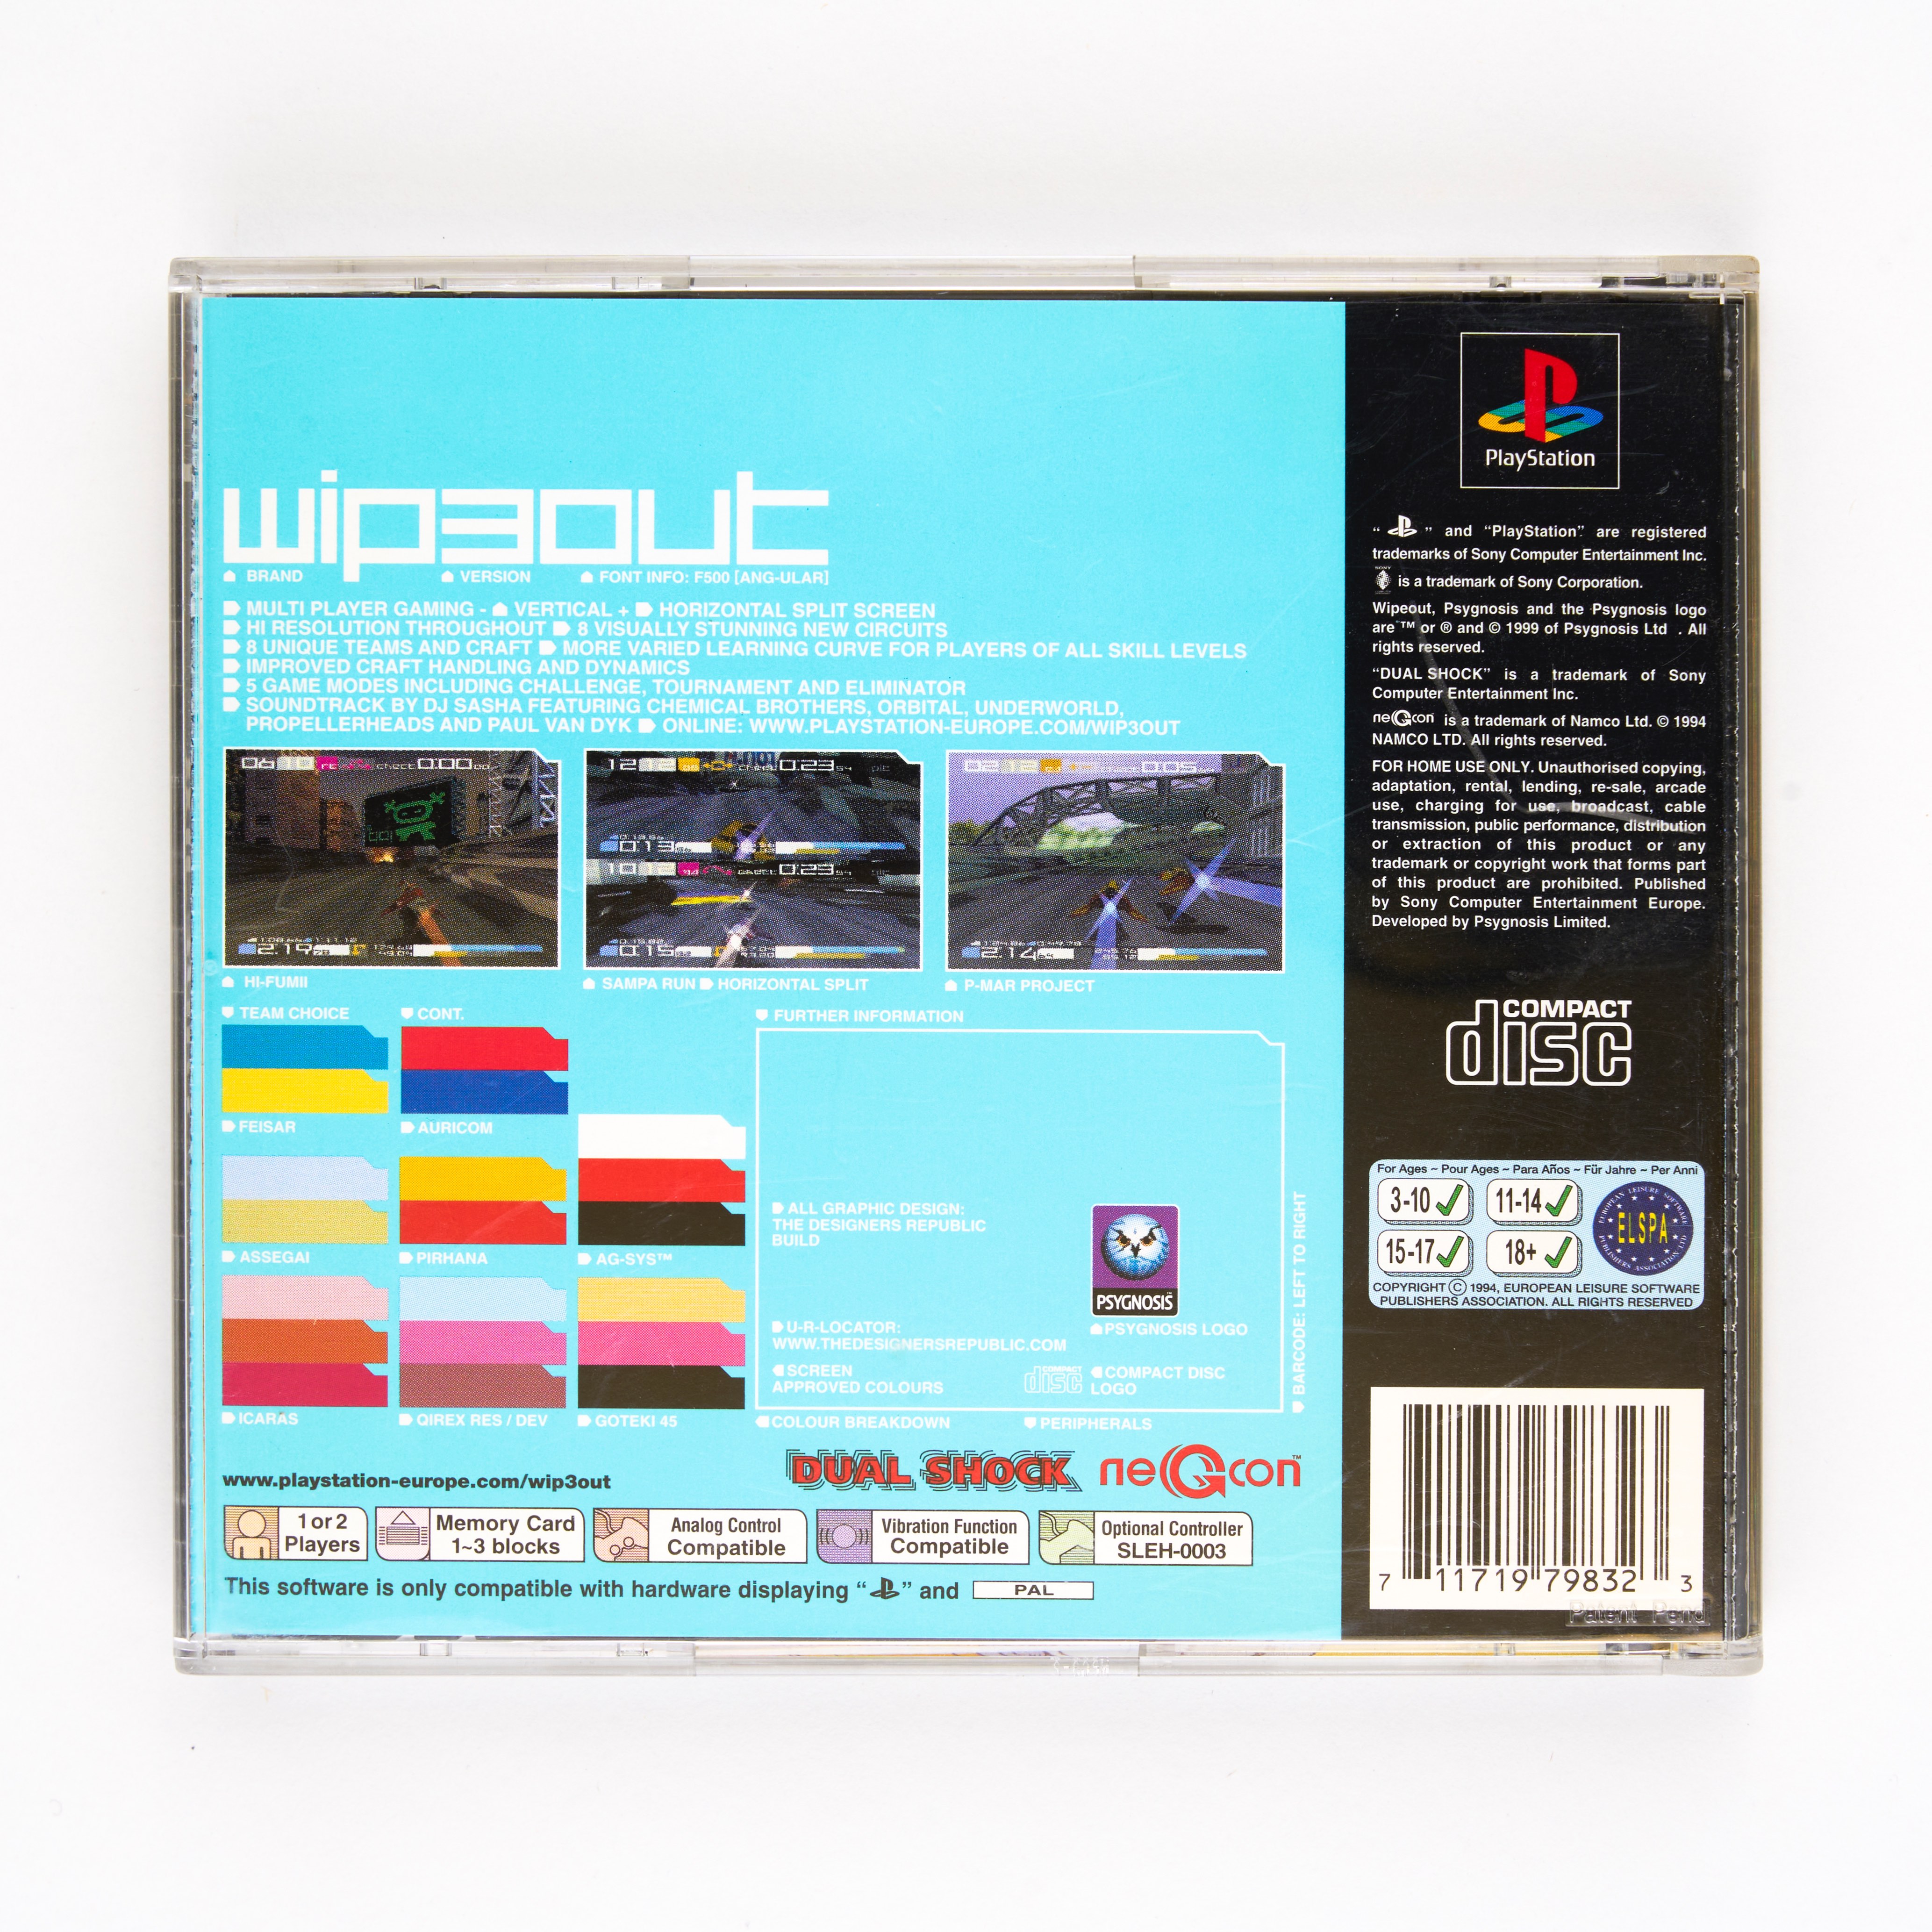 Sony - Wipeout 3 PAL - Playstation - Complete In Box - Image 2 of 2